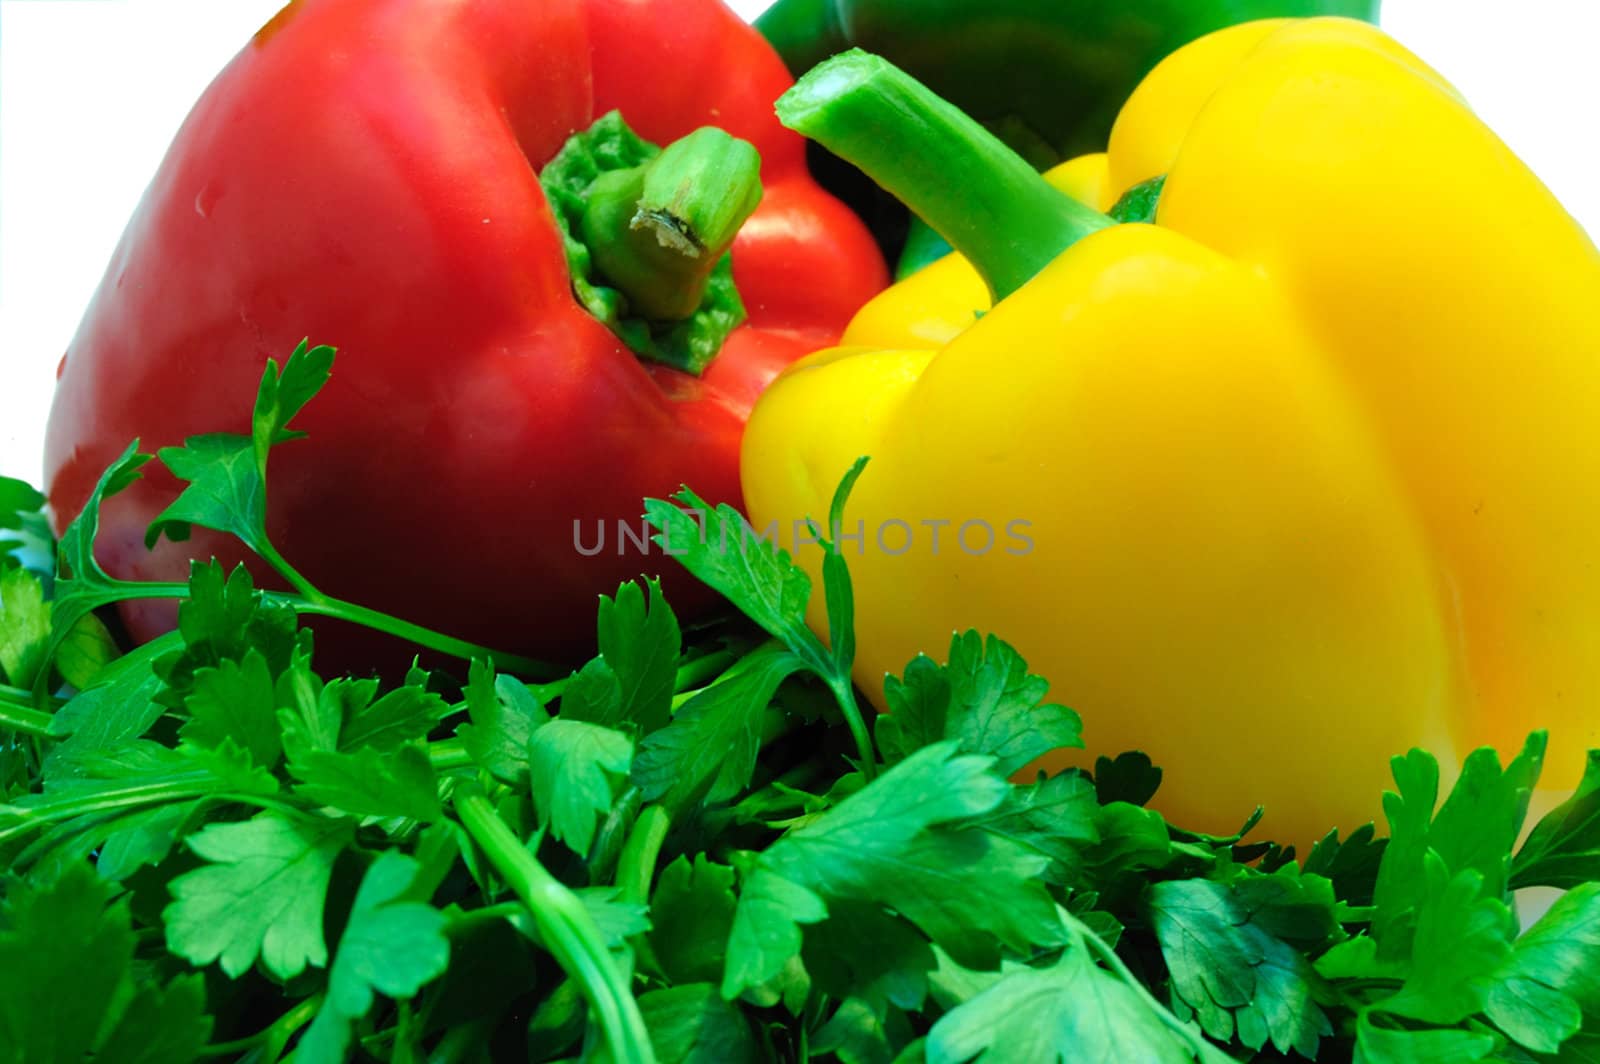 two sweet peppers (paprika) and parsley